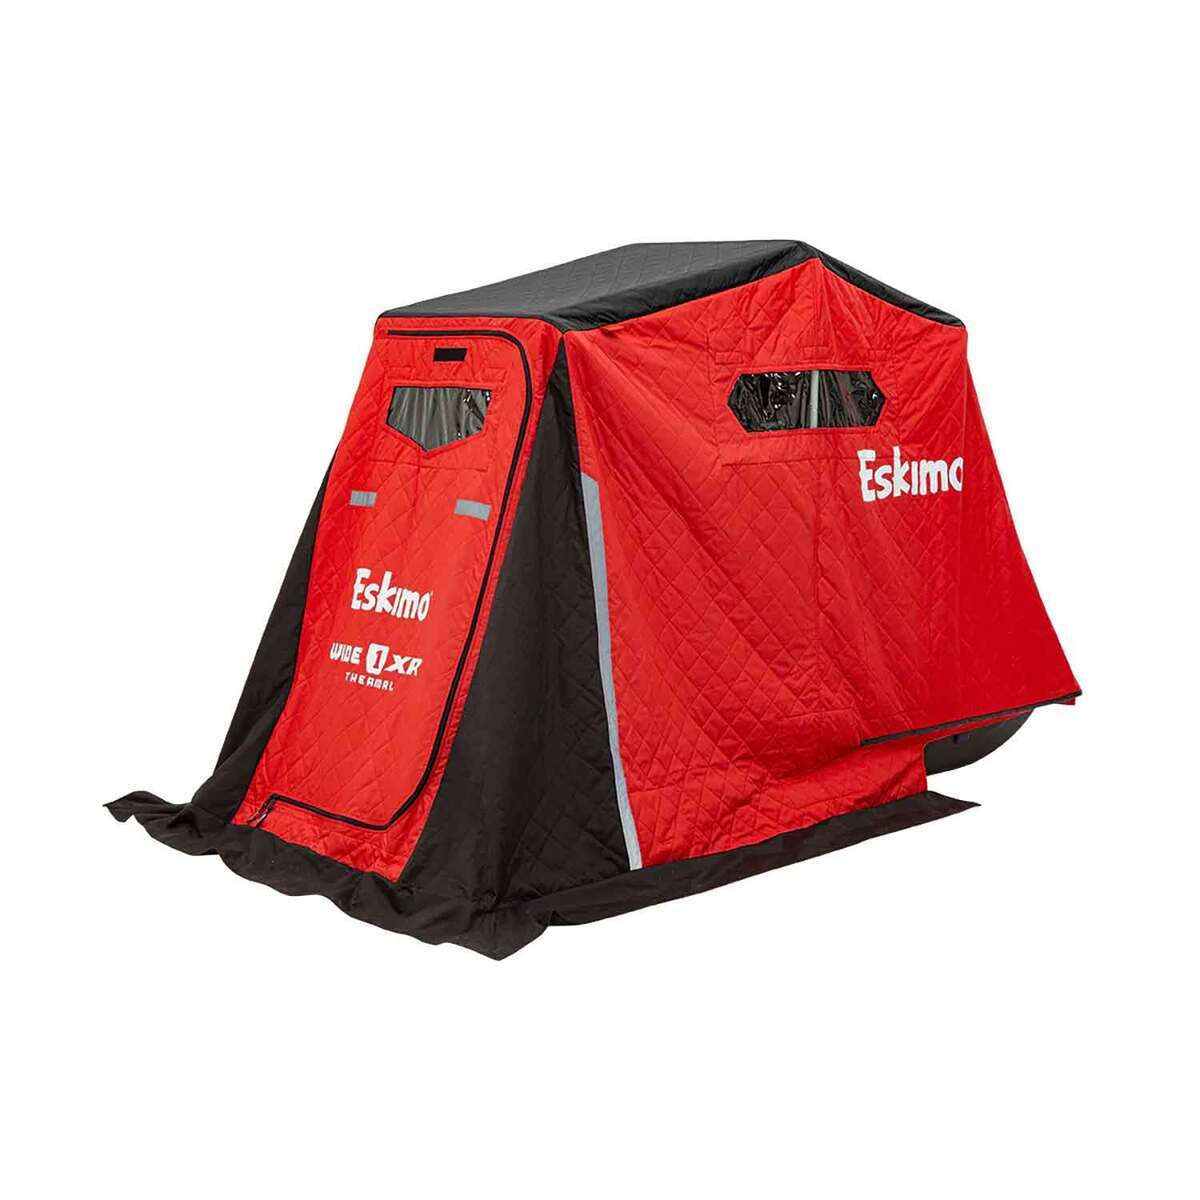  Shappell Jet Ice Fishing Sled, Large Heavy-Duty Multi-Purpose  Utility Sleds for Hauling Fire Wood, Deer, Duck Hunting, Fishing Gear,  Supplies, and Accessories : Fishing Ice Fishing Shelters : Sports 